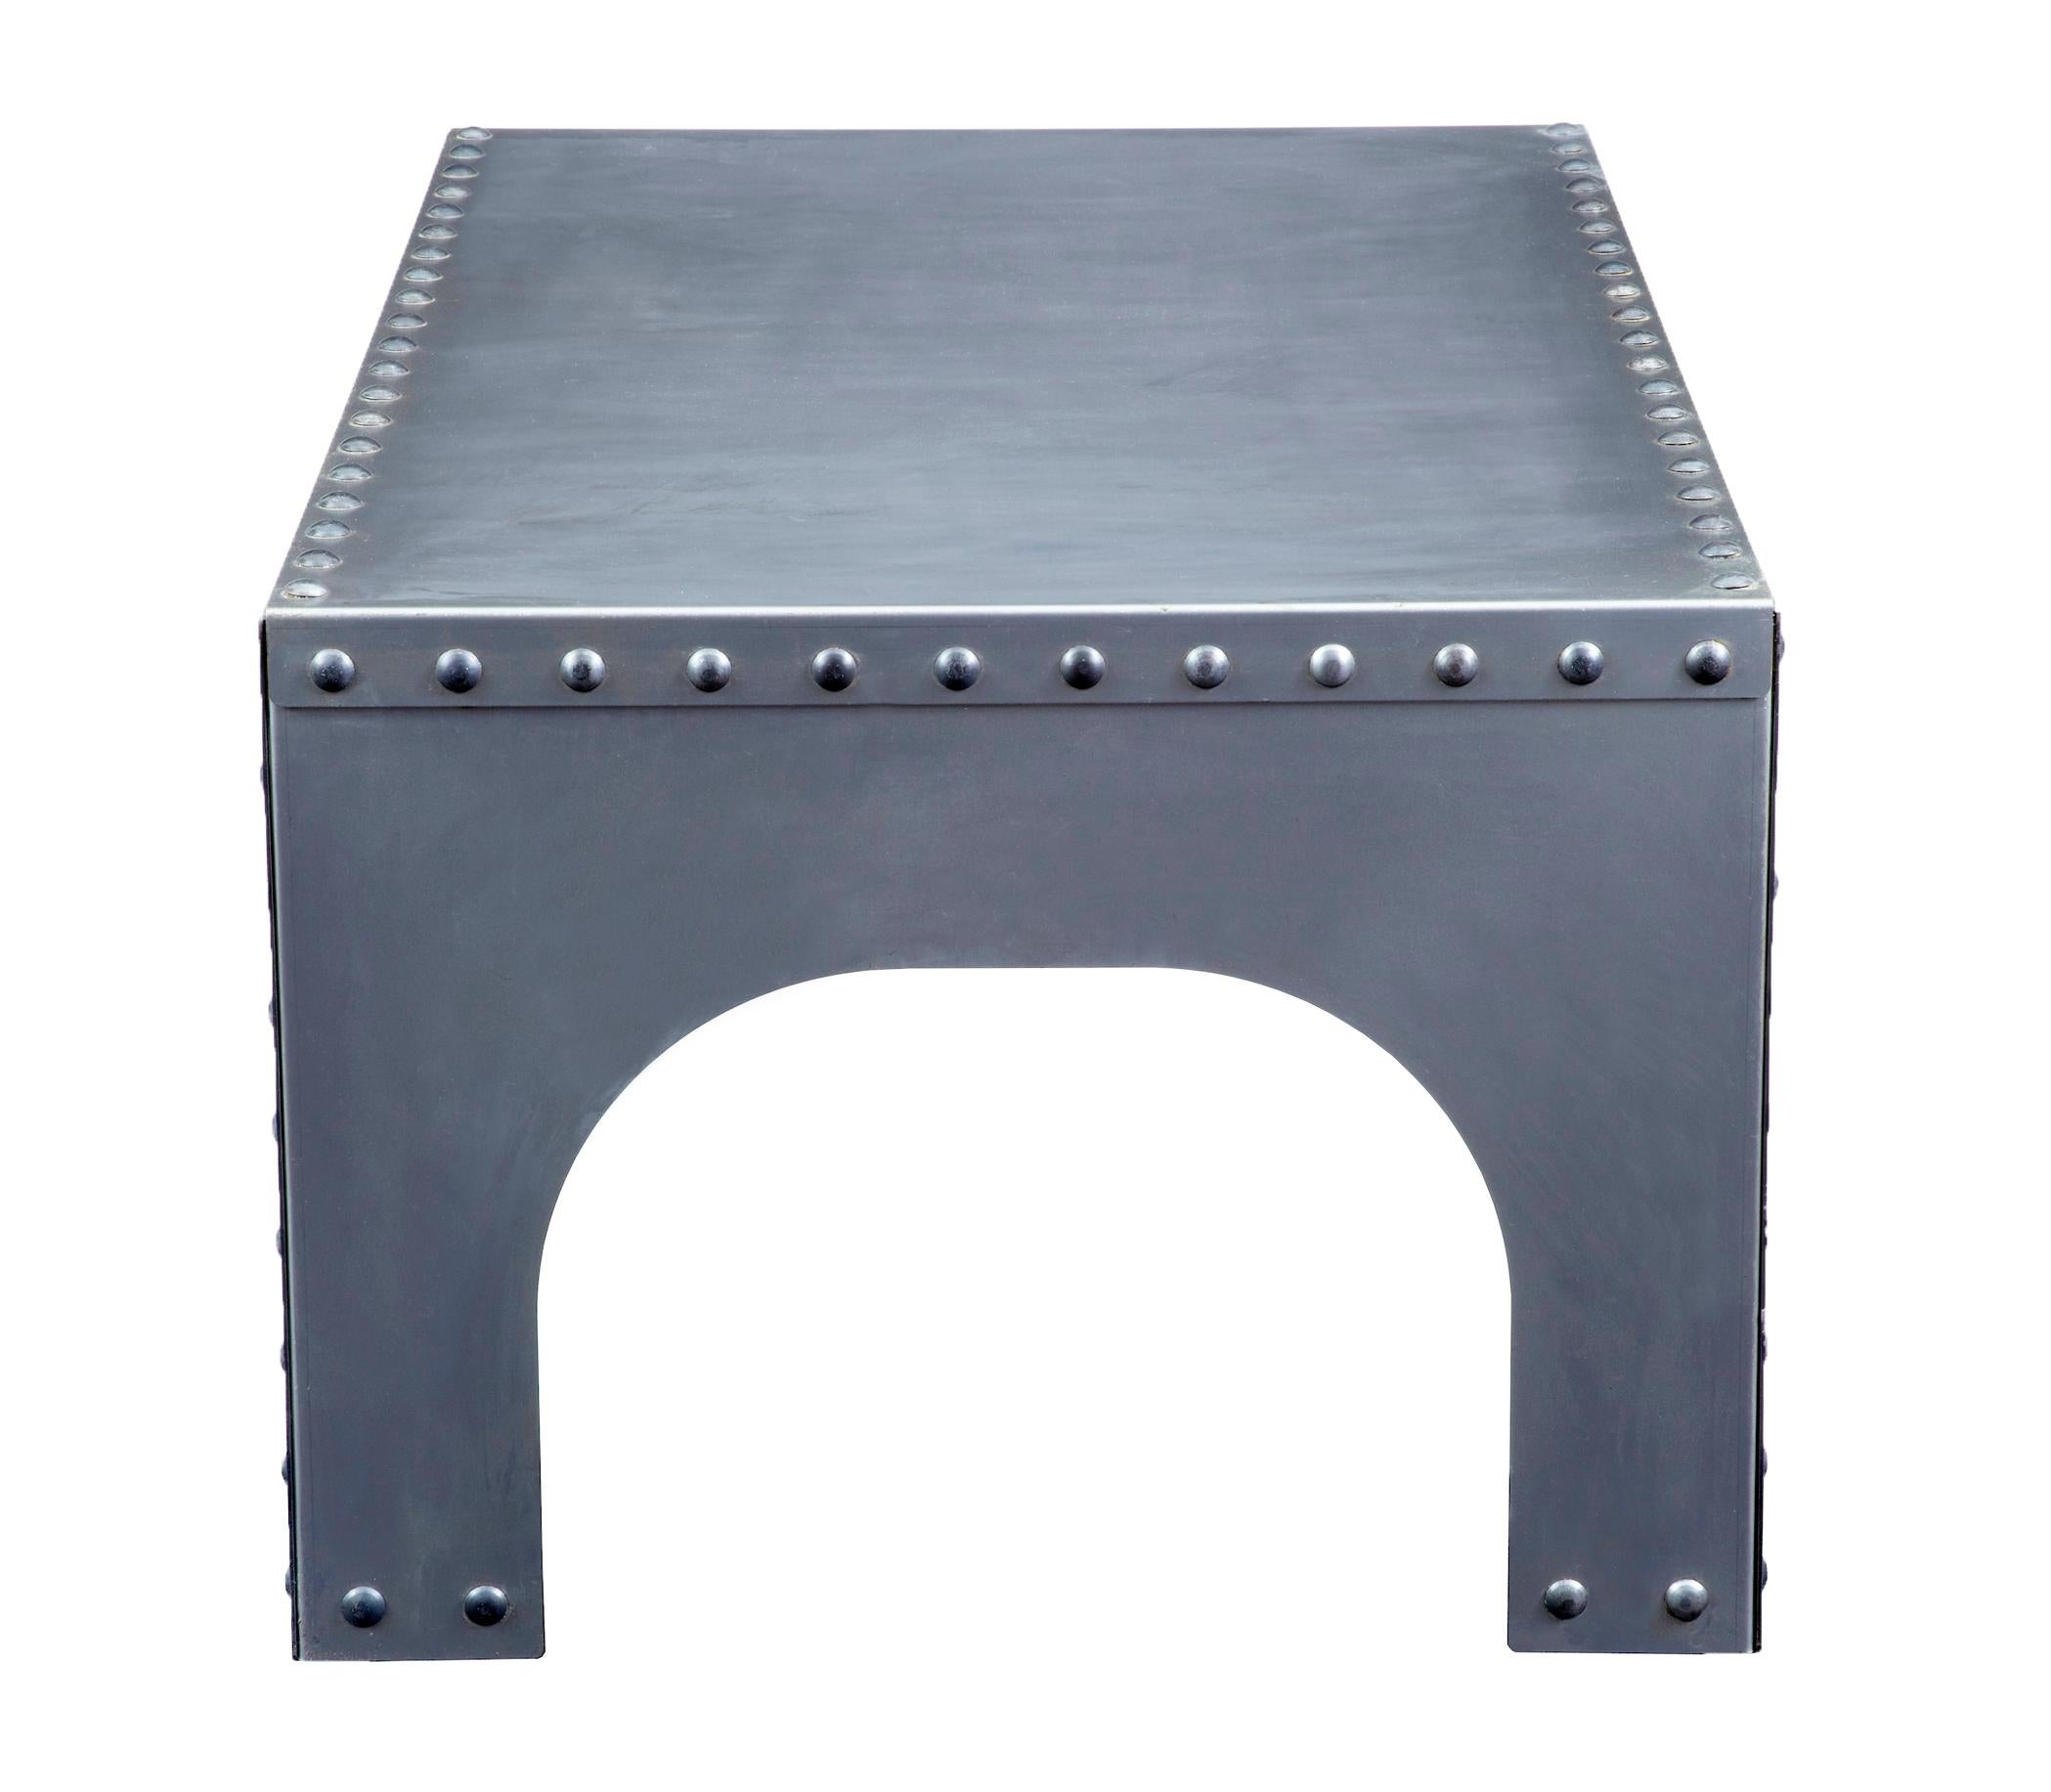 Handmade Industrial steel occasional table, circa 2000

Modern Industrial feel table, handmade and held in place by decorative rivets. Ideal for use as a side table or in the garden room

Minor surface marks.